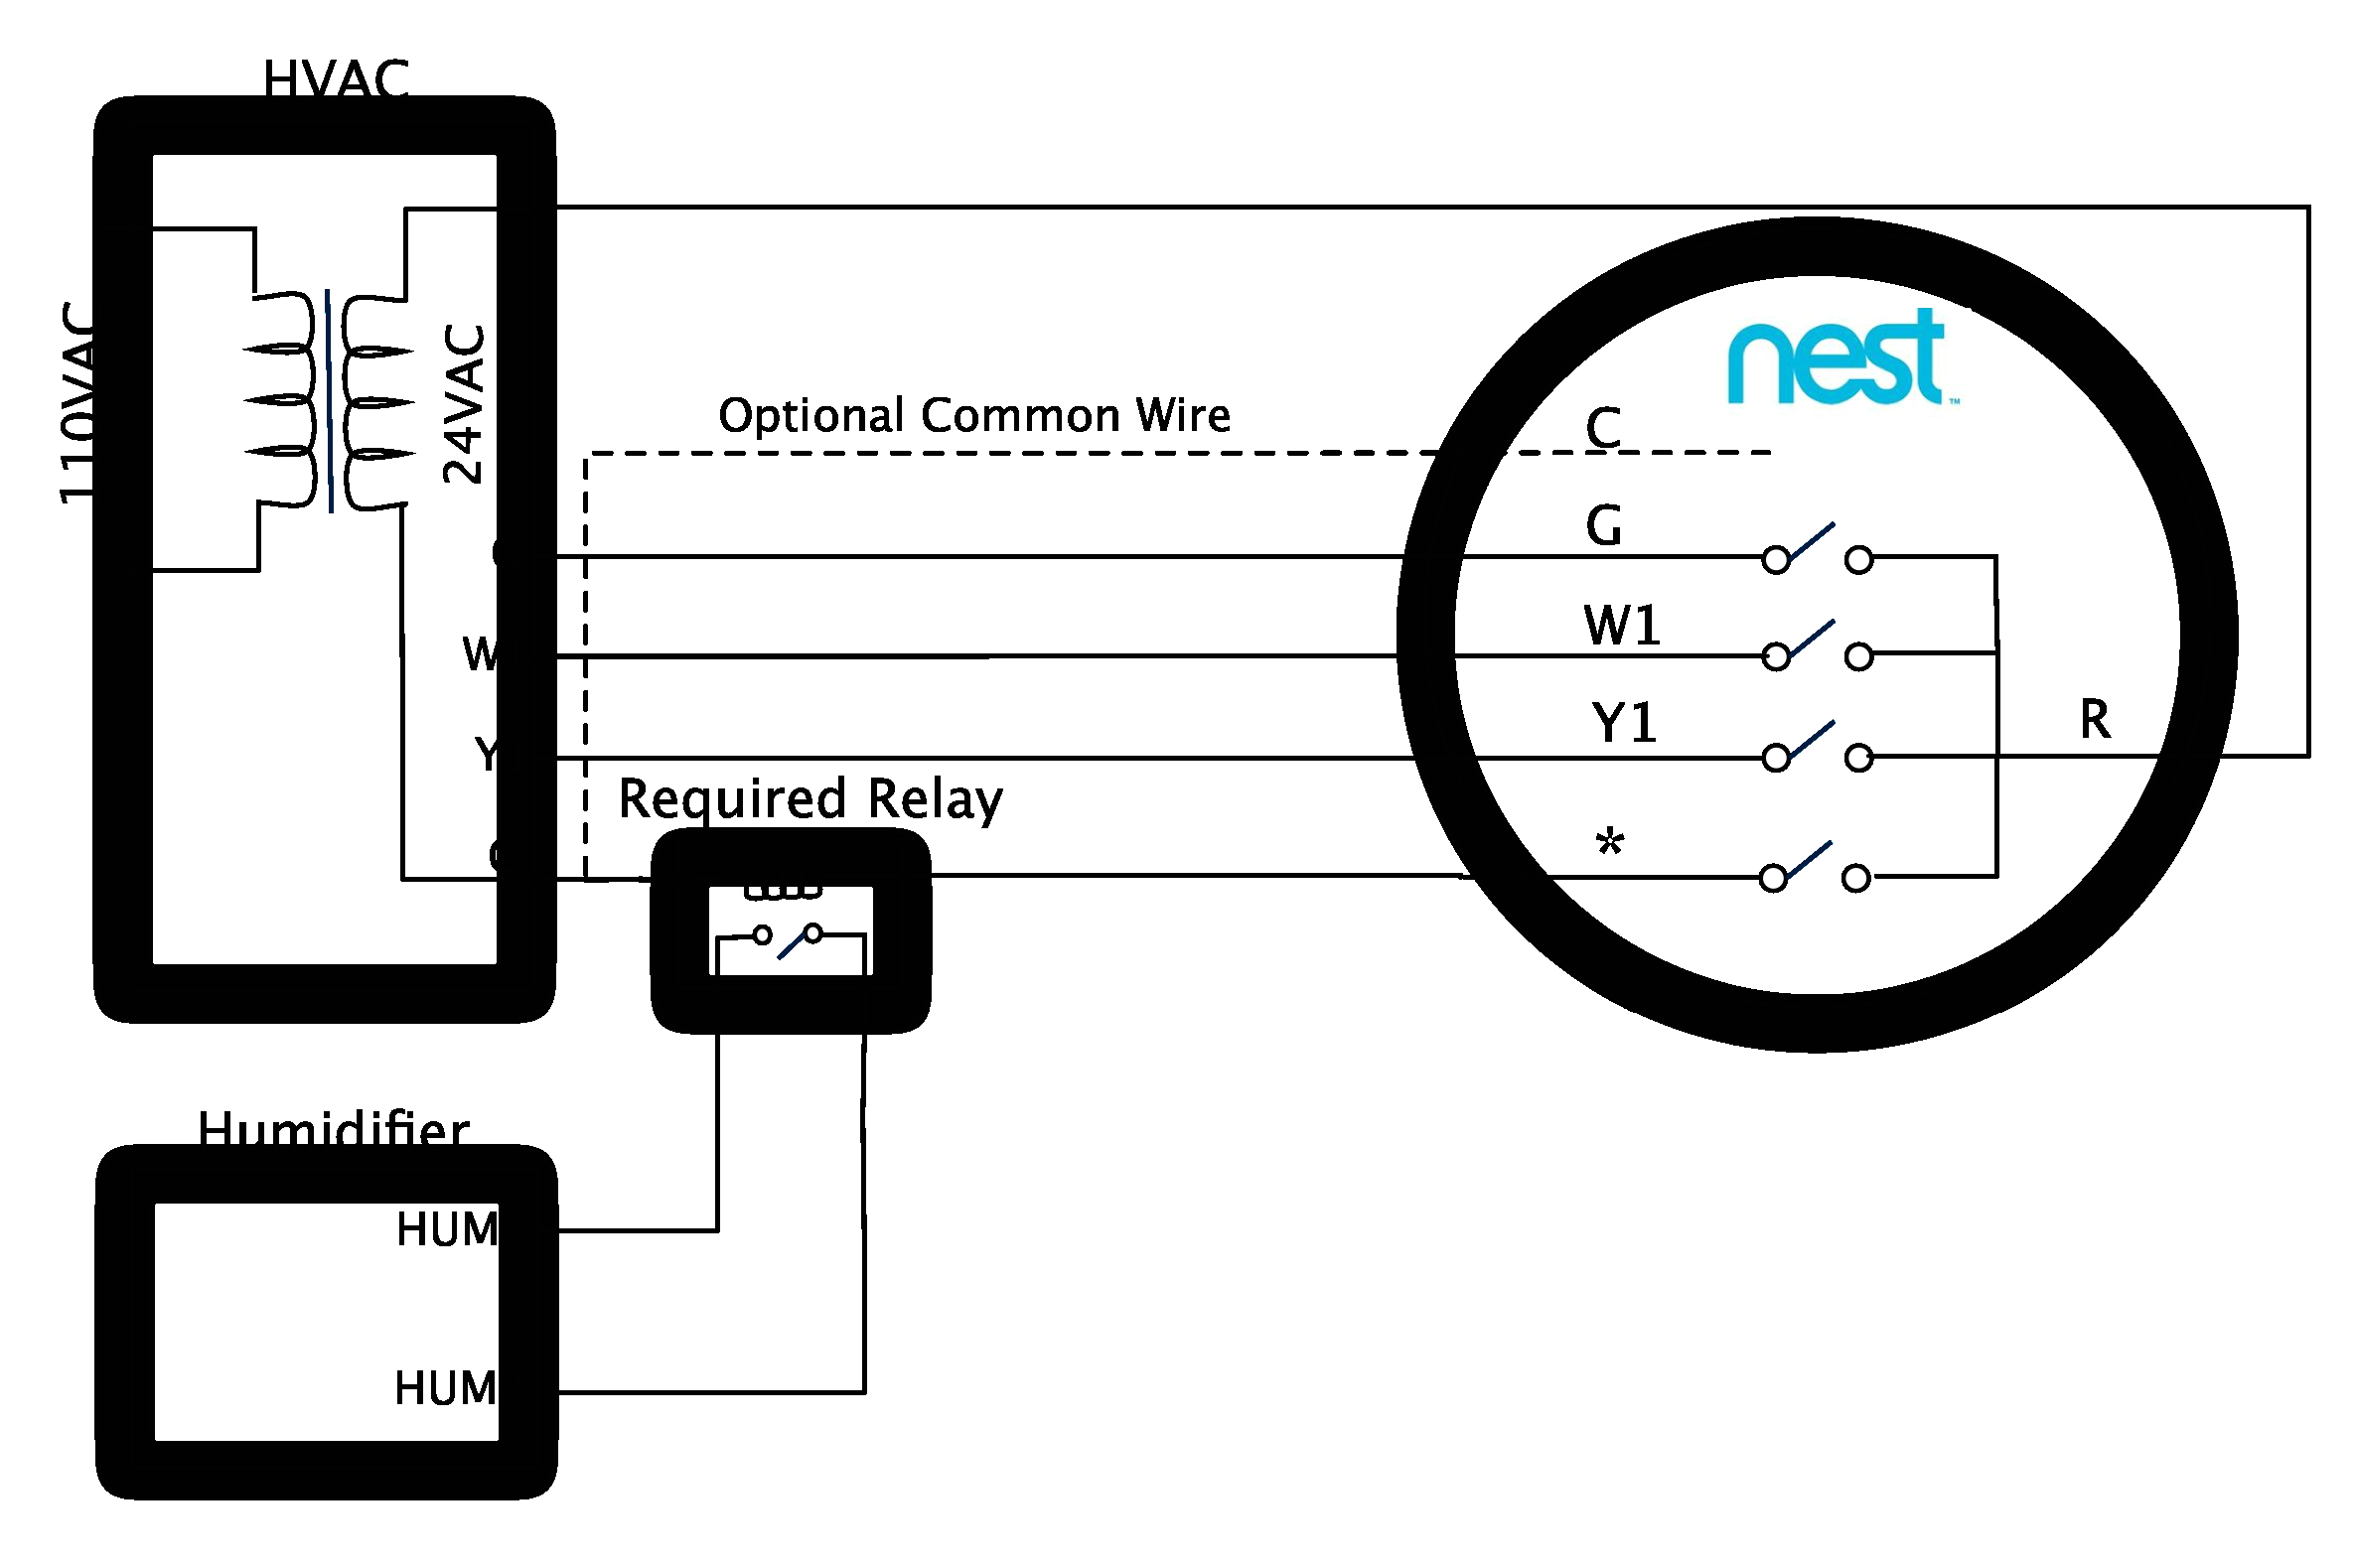 wiring diagram for nest thermostat wiring diagram blogwiring diagrams for nest thermostat get free image about